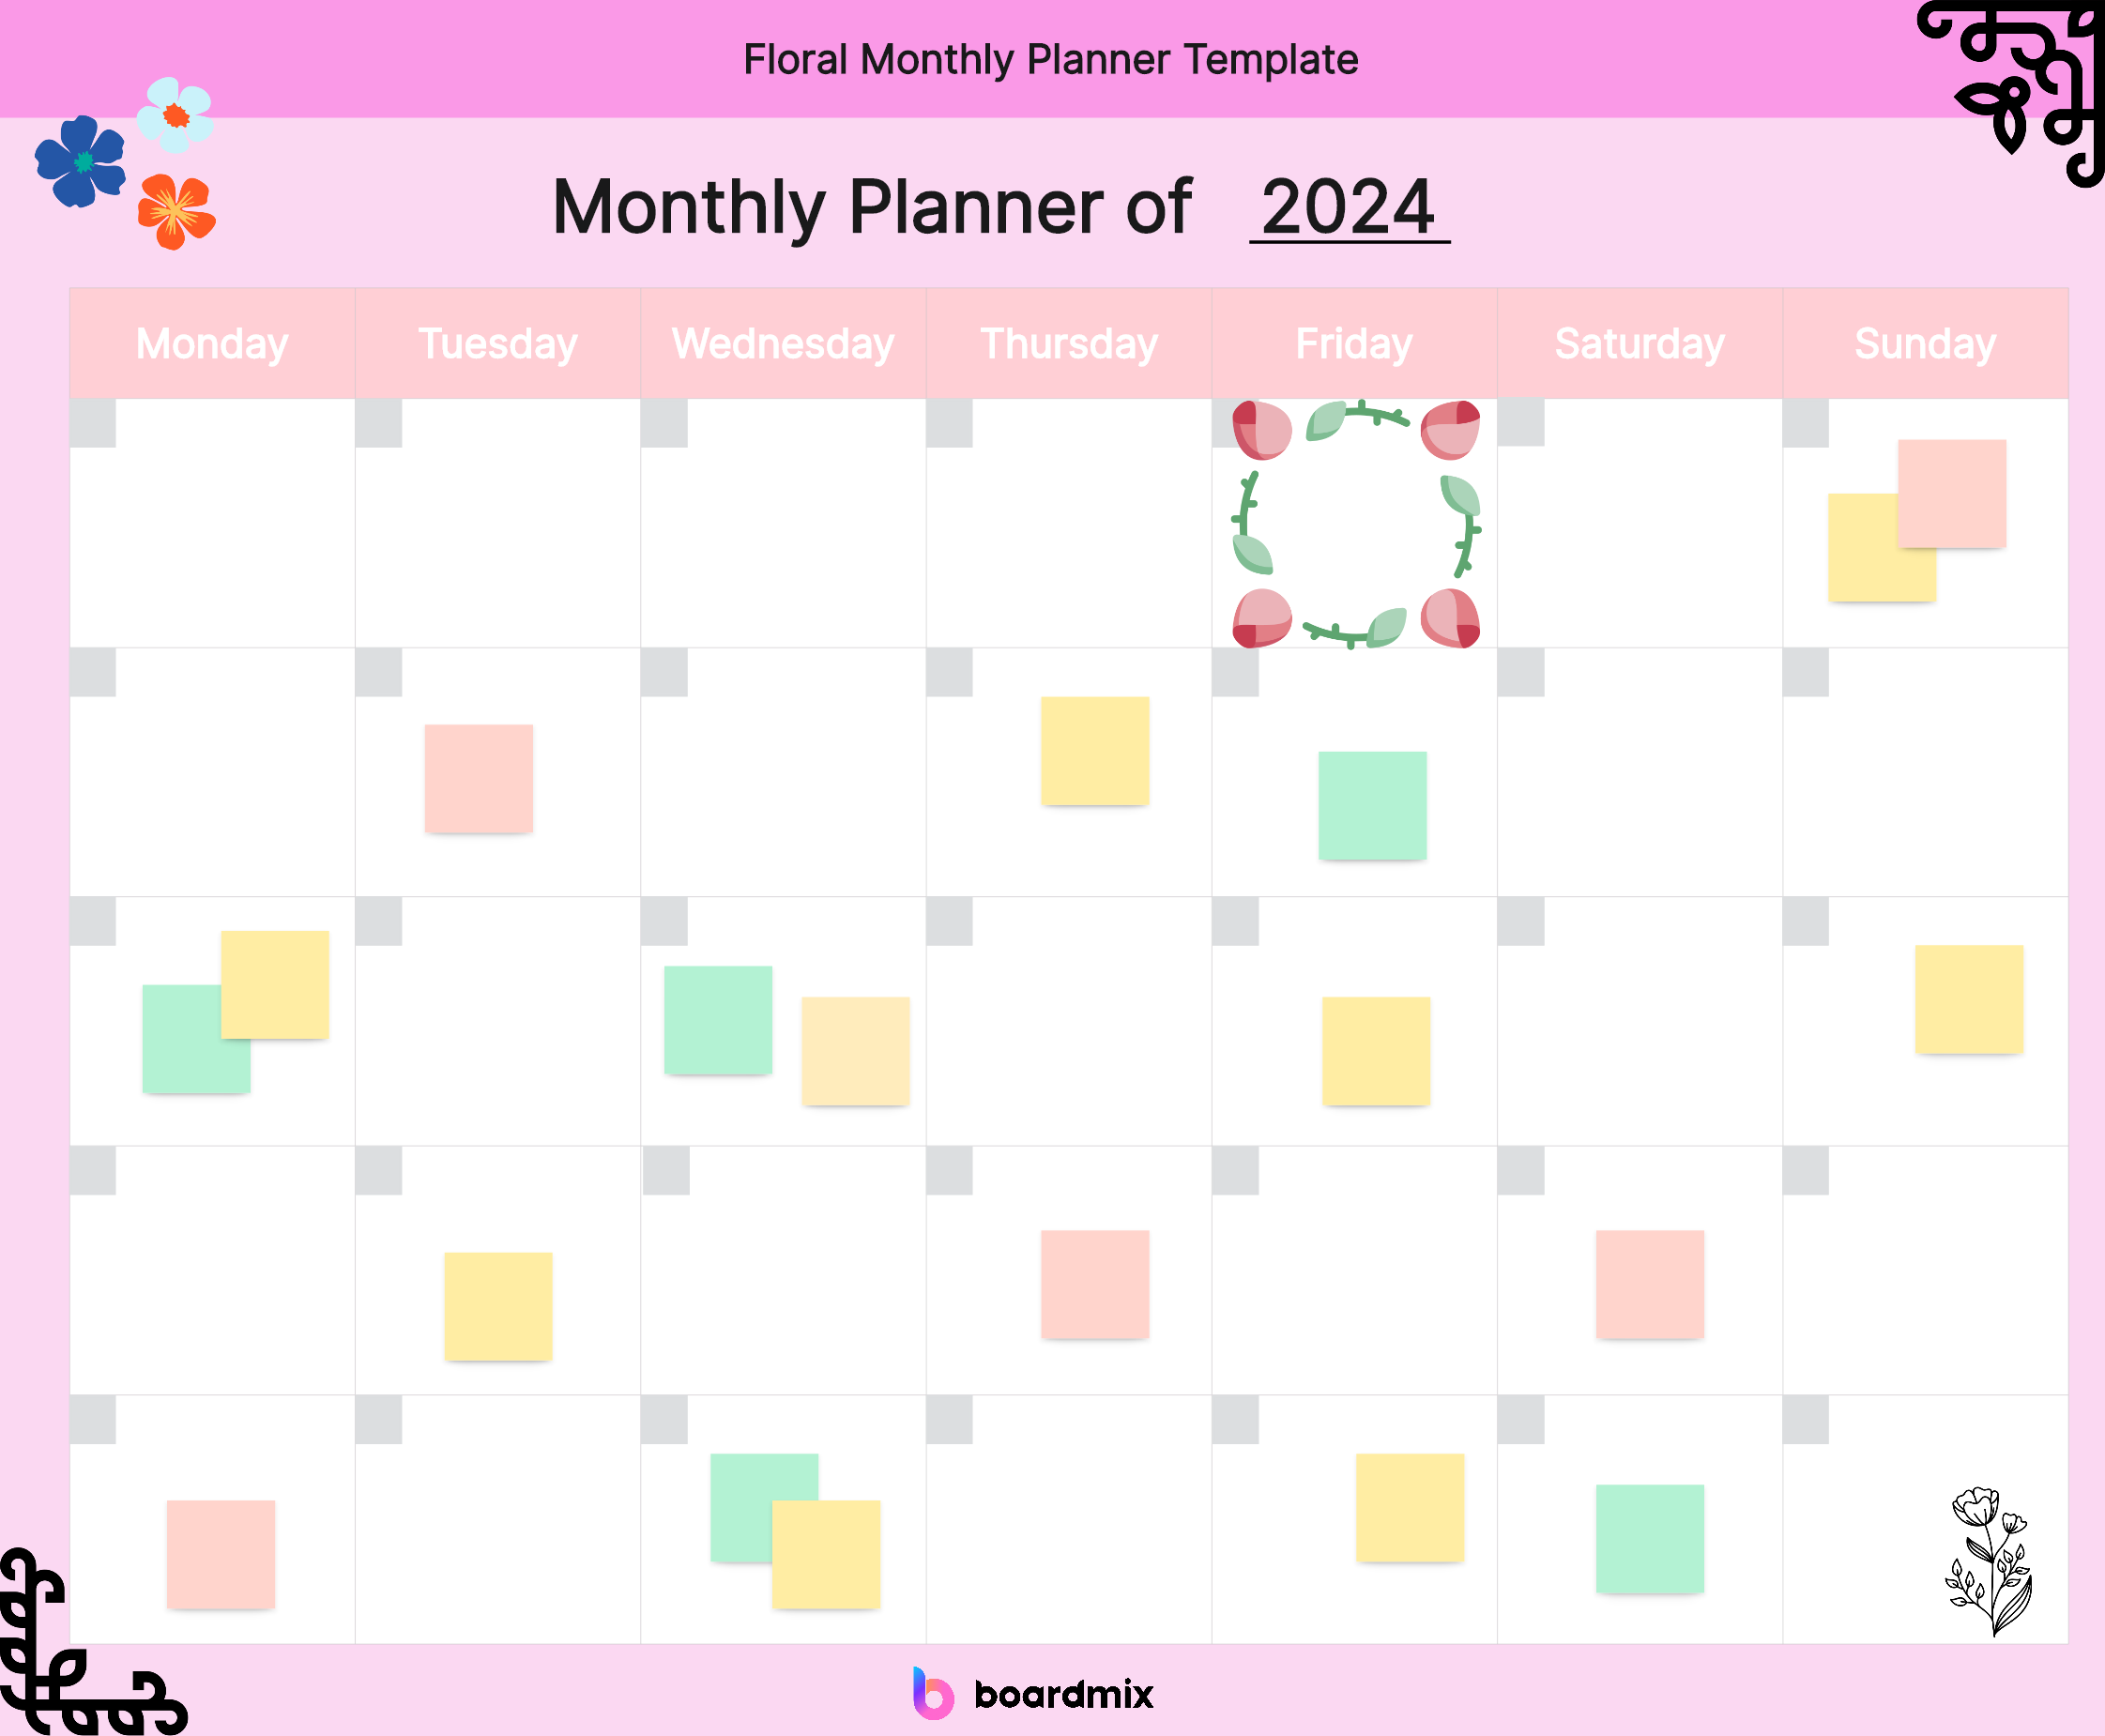 floral-monthly-planner-template.png